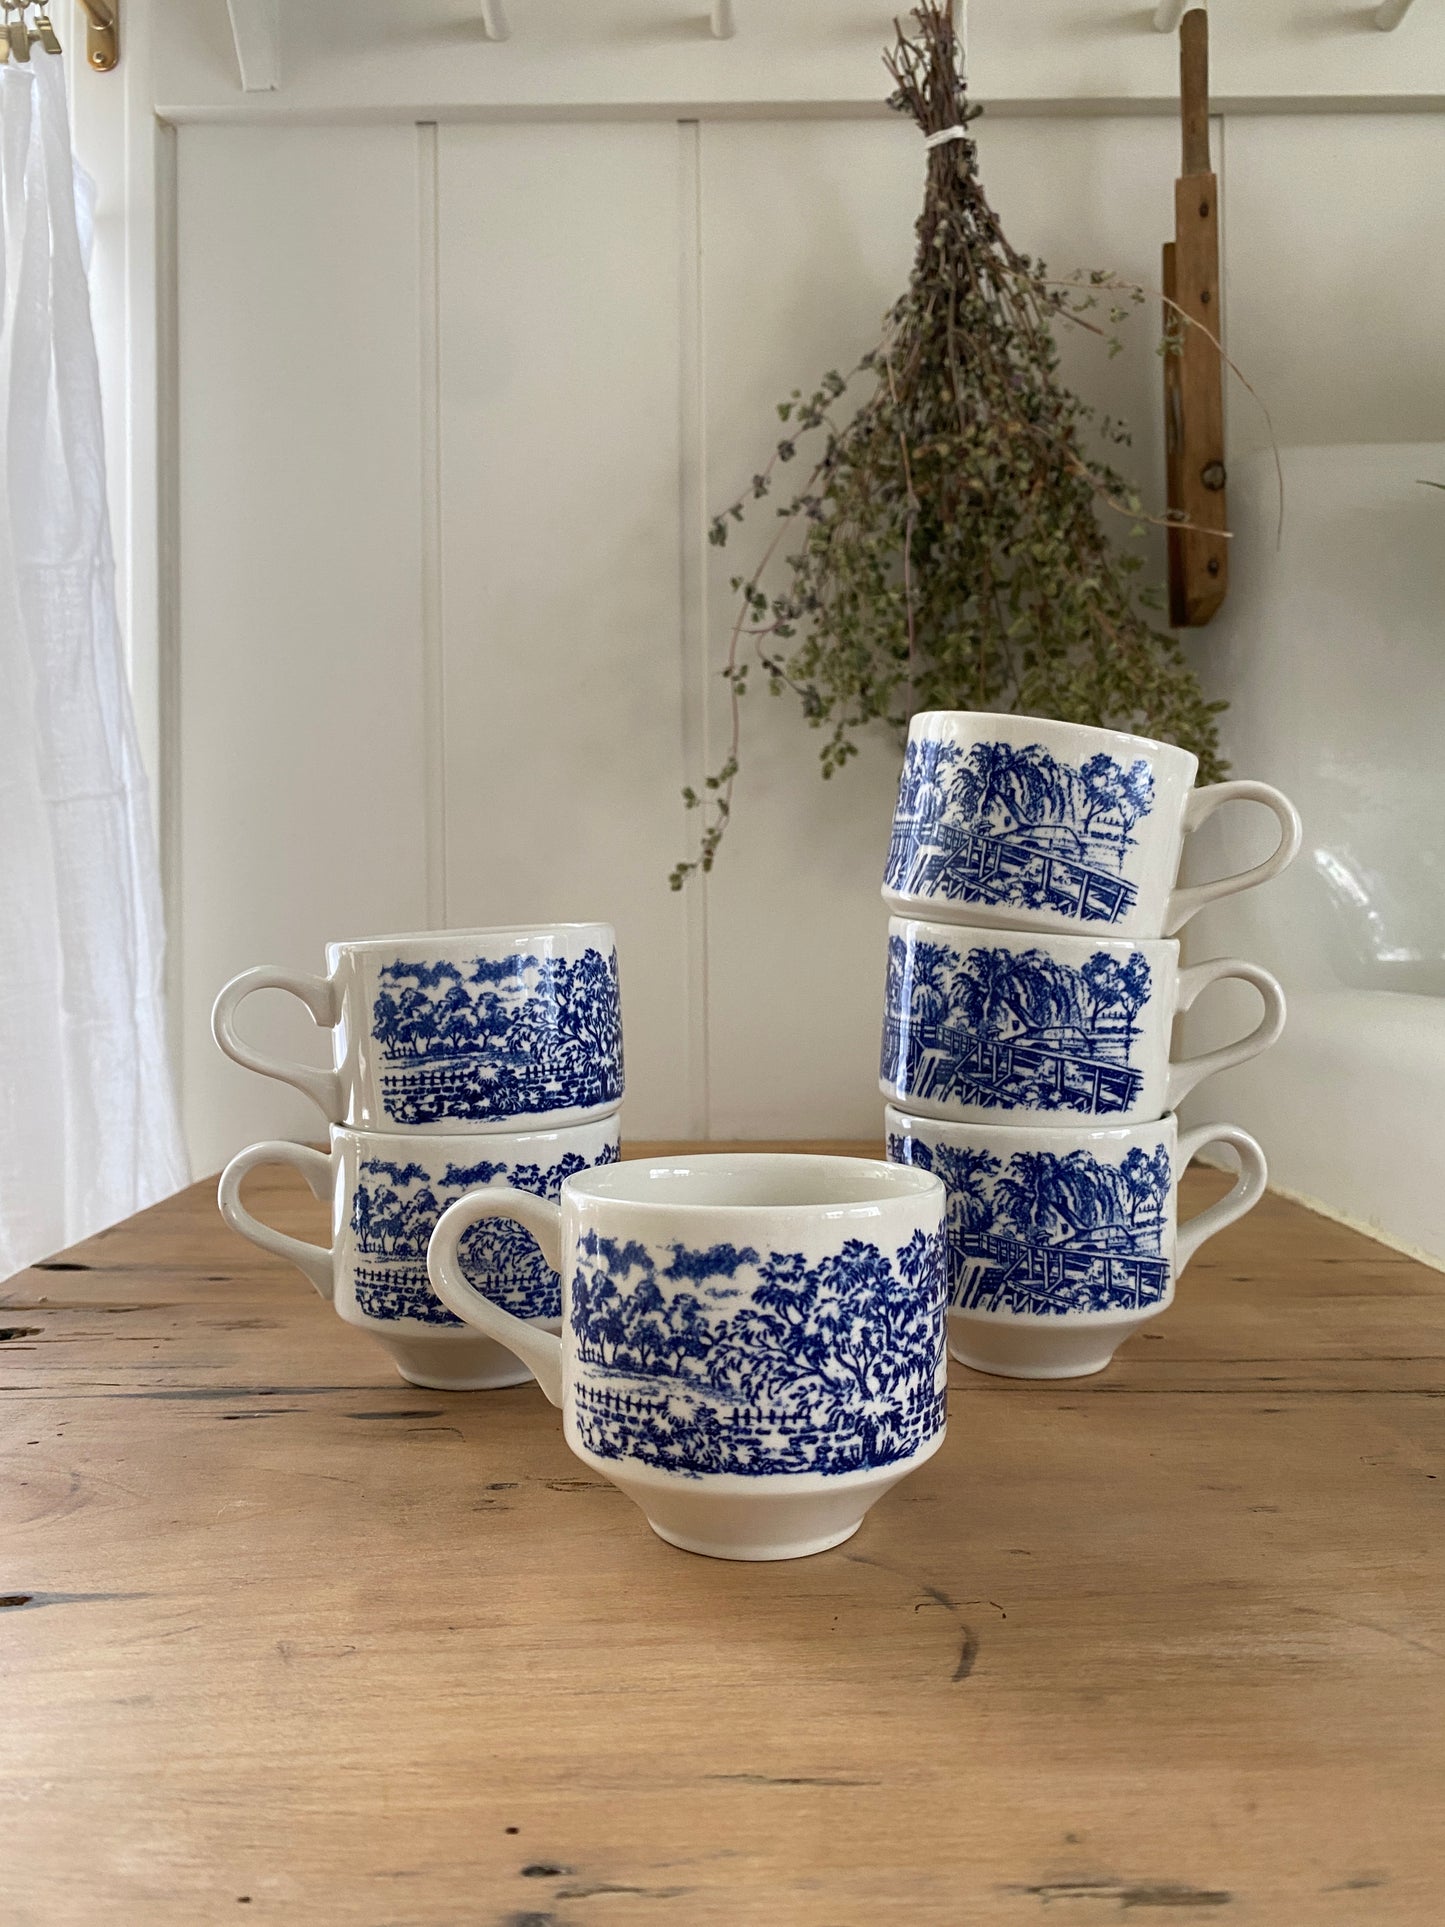 vintage blue and white teacups